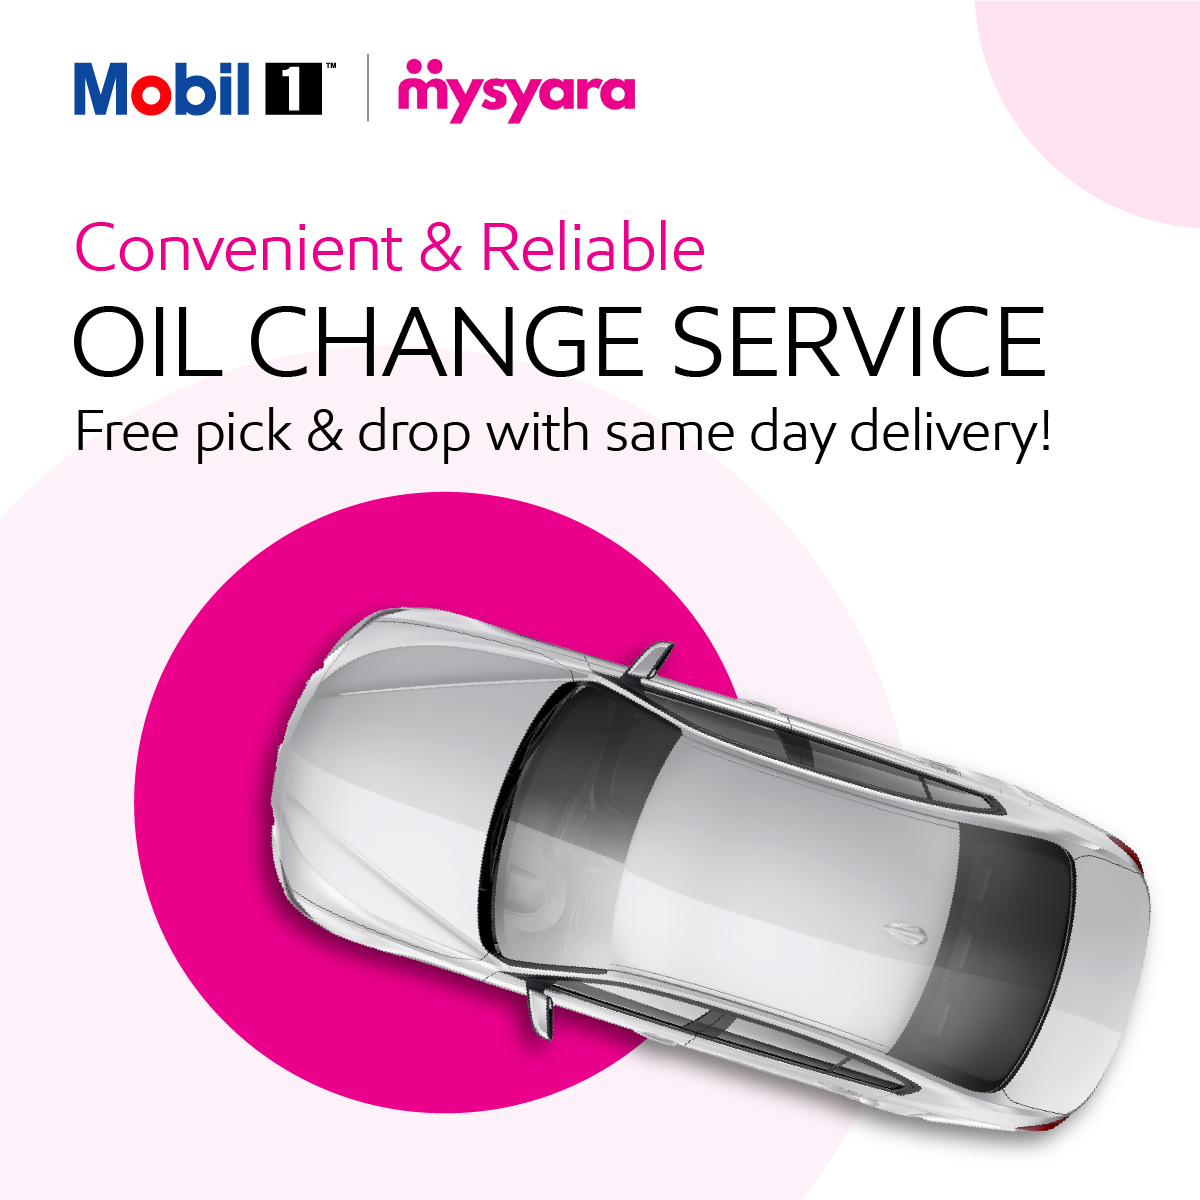 MySyara offers convenient and reliable oil change service where you will have free pick-up, free drop-off as well as same day delivery. 

#UAE #Mysyara #onlinecarservice #bestcarservice #hasslefreeservice #Mobil #Mobil1 #Mobillubricants #MobilSuper #MobilUAE @mysyara_app